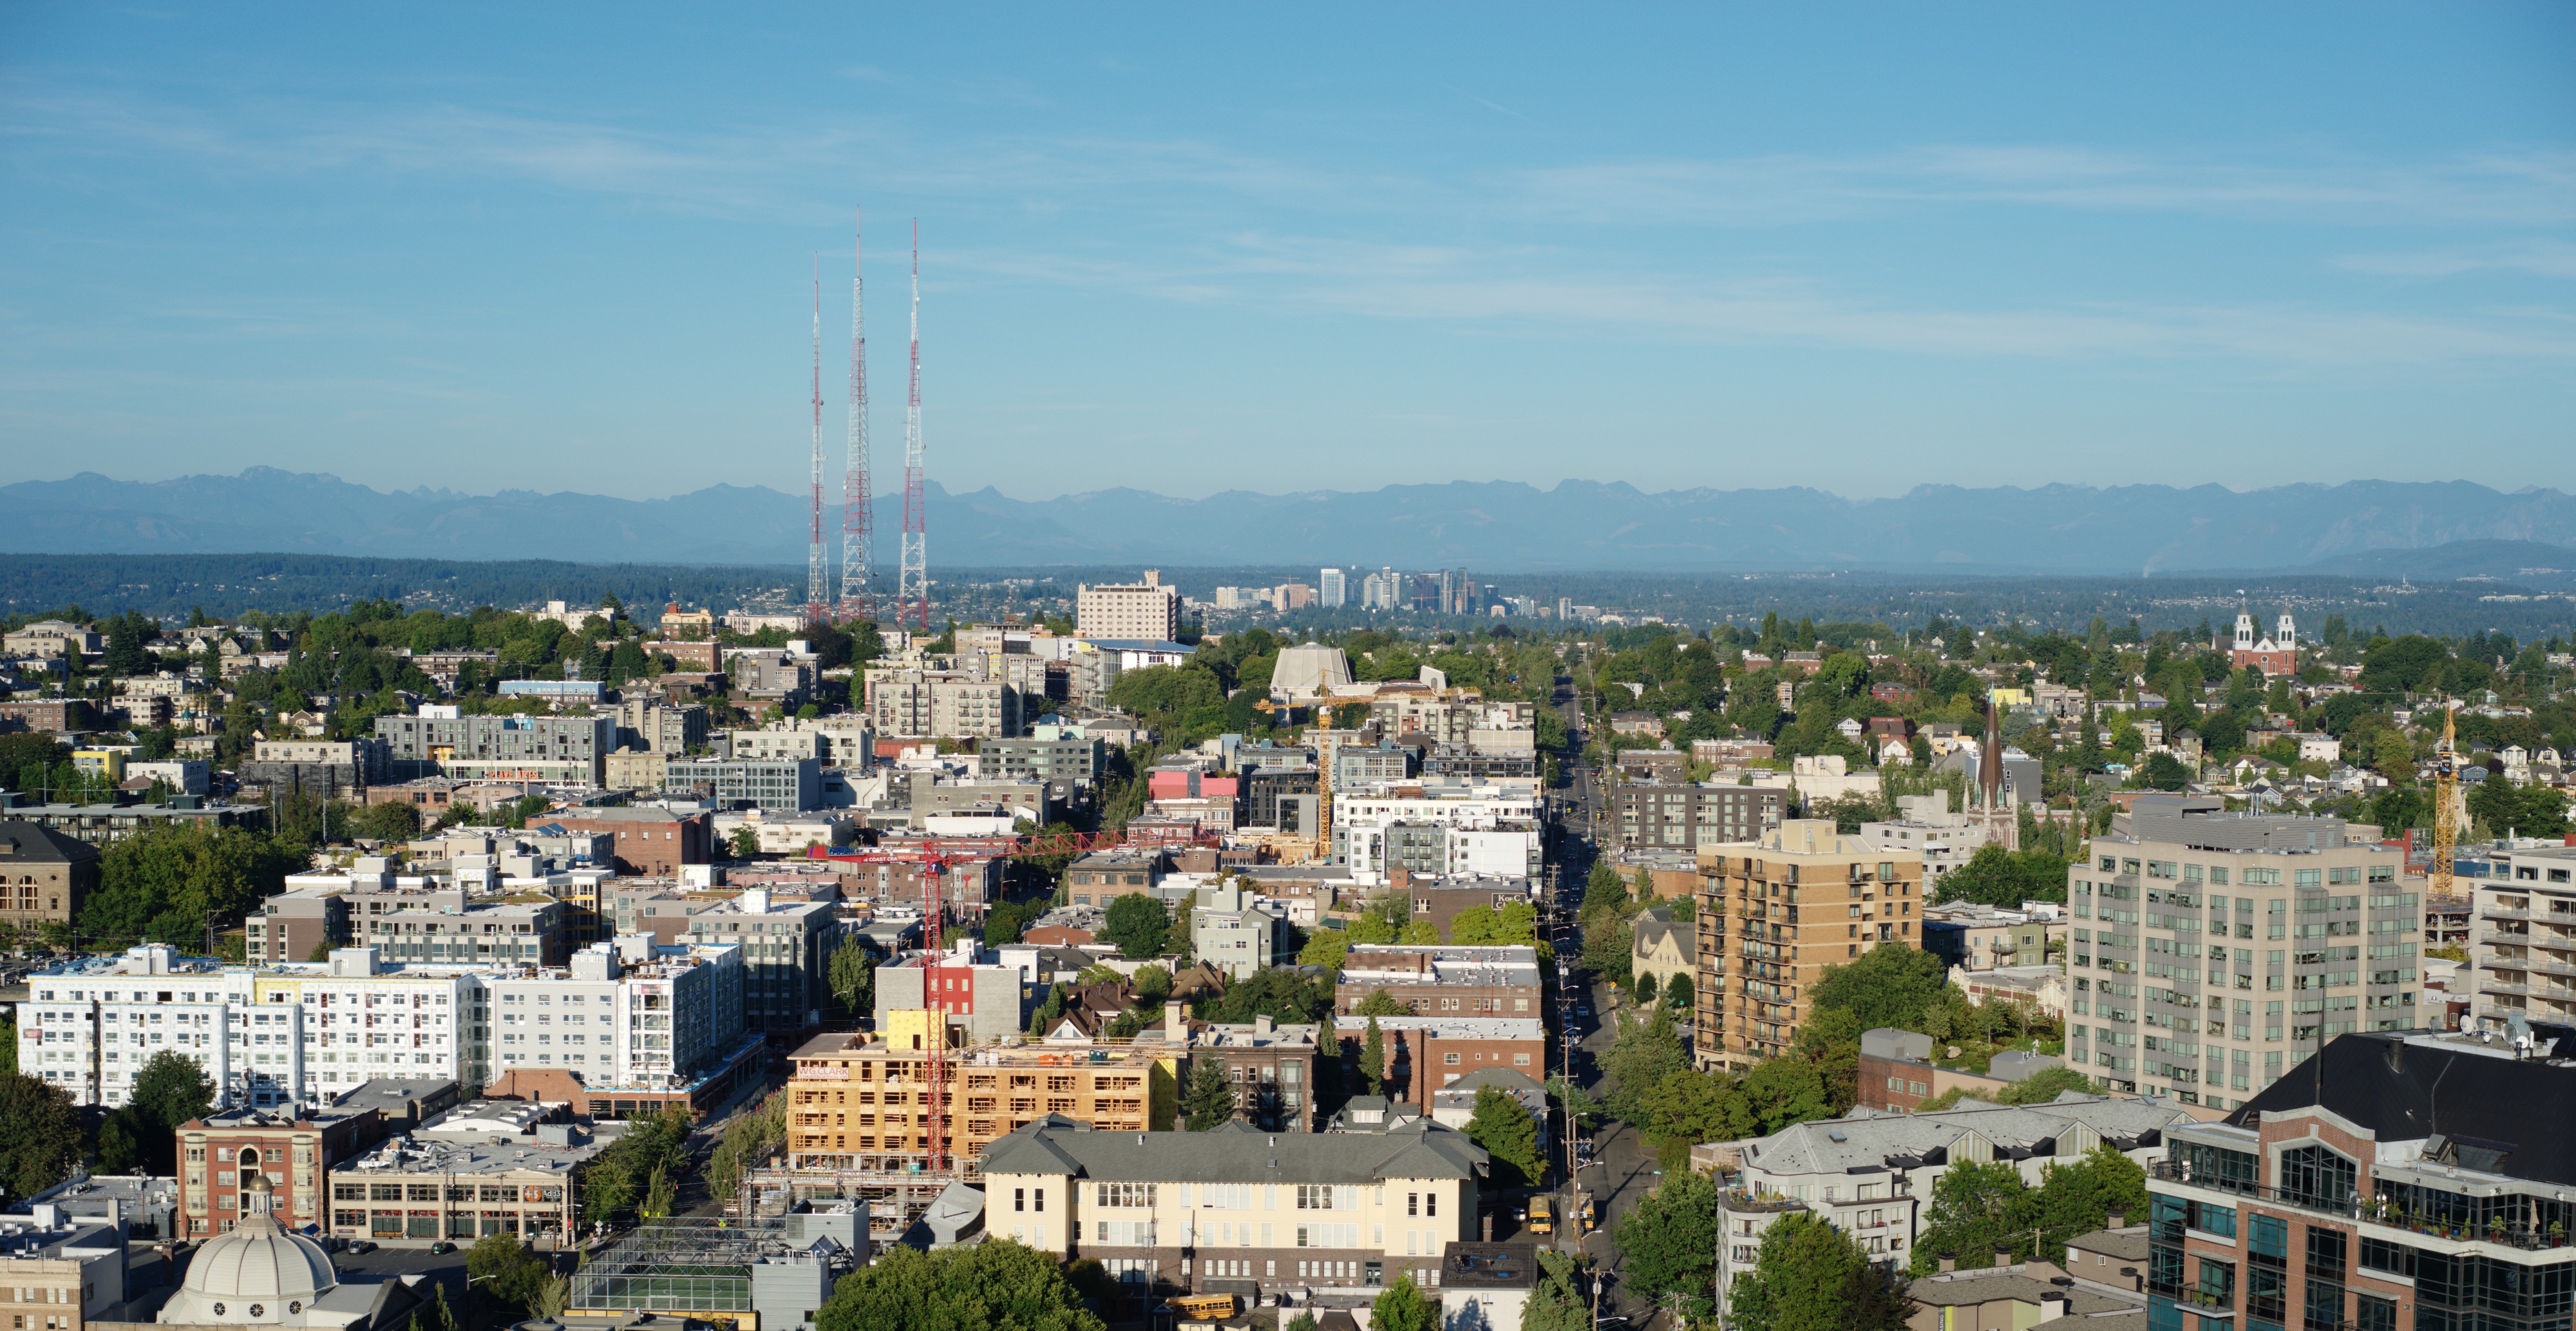 Capitol Hill as seen from 9th and Pine looking east towards Bellevue, WA